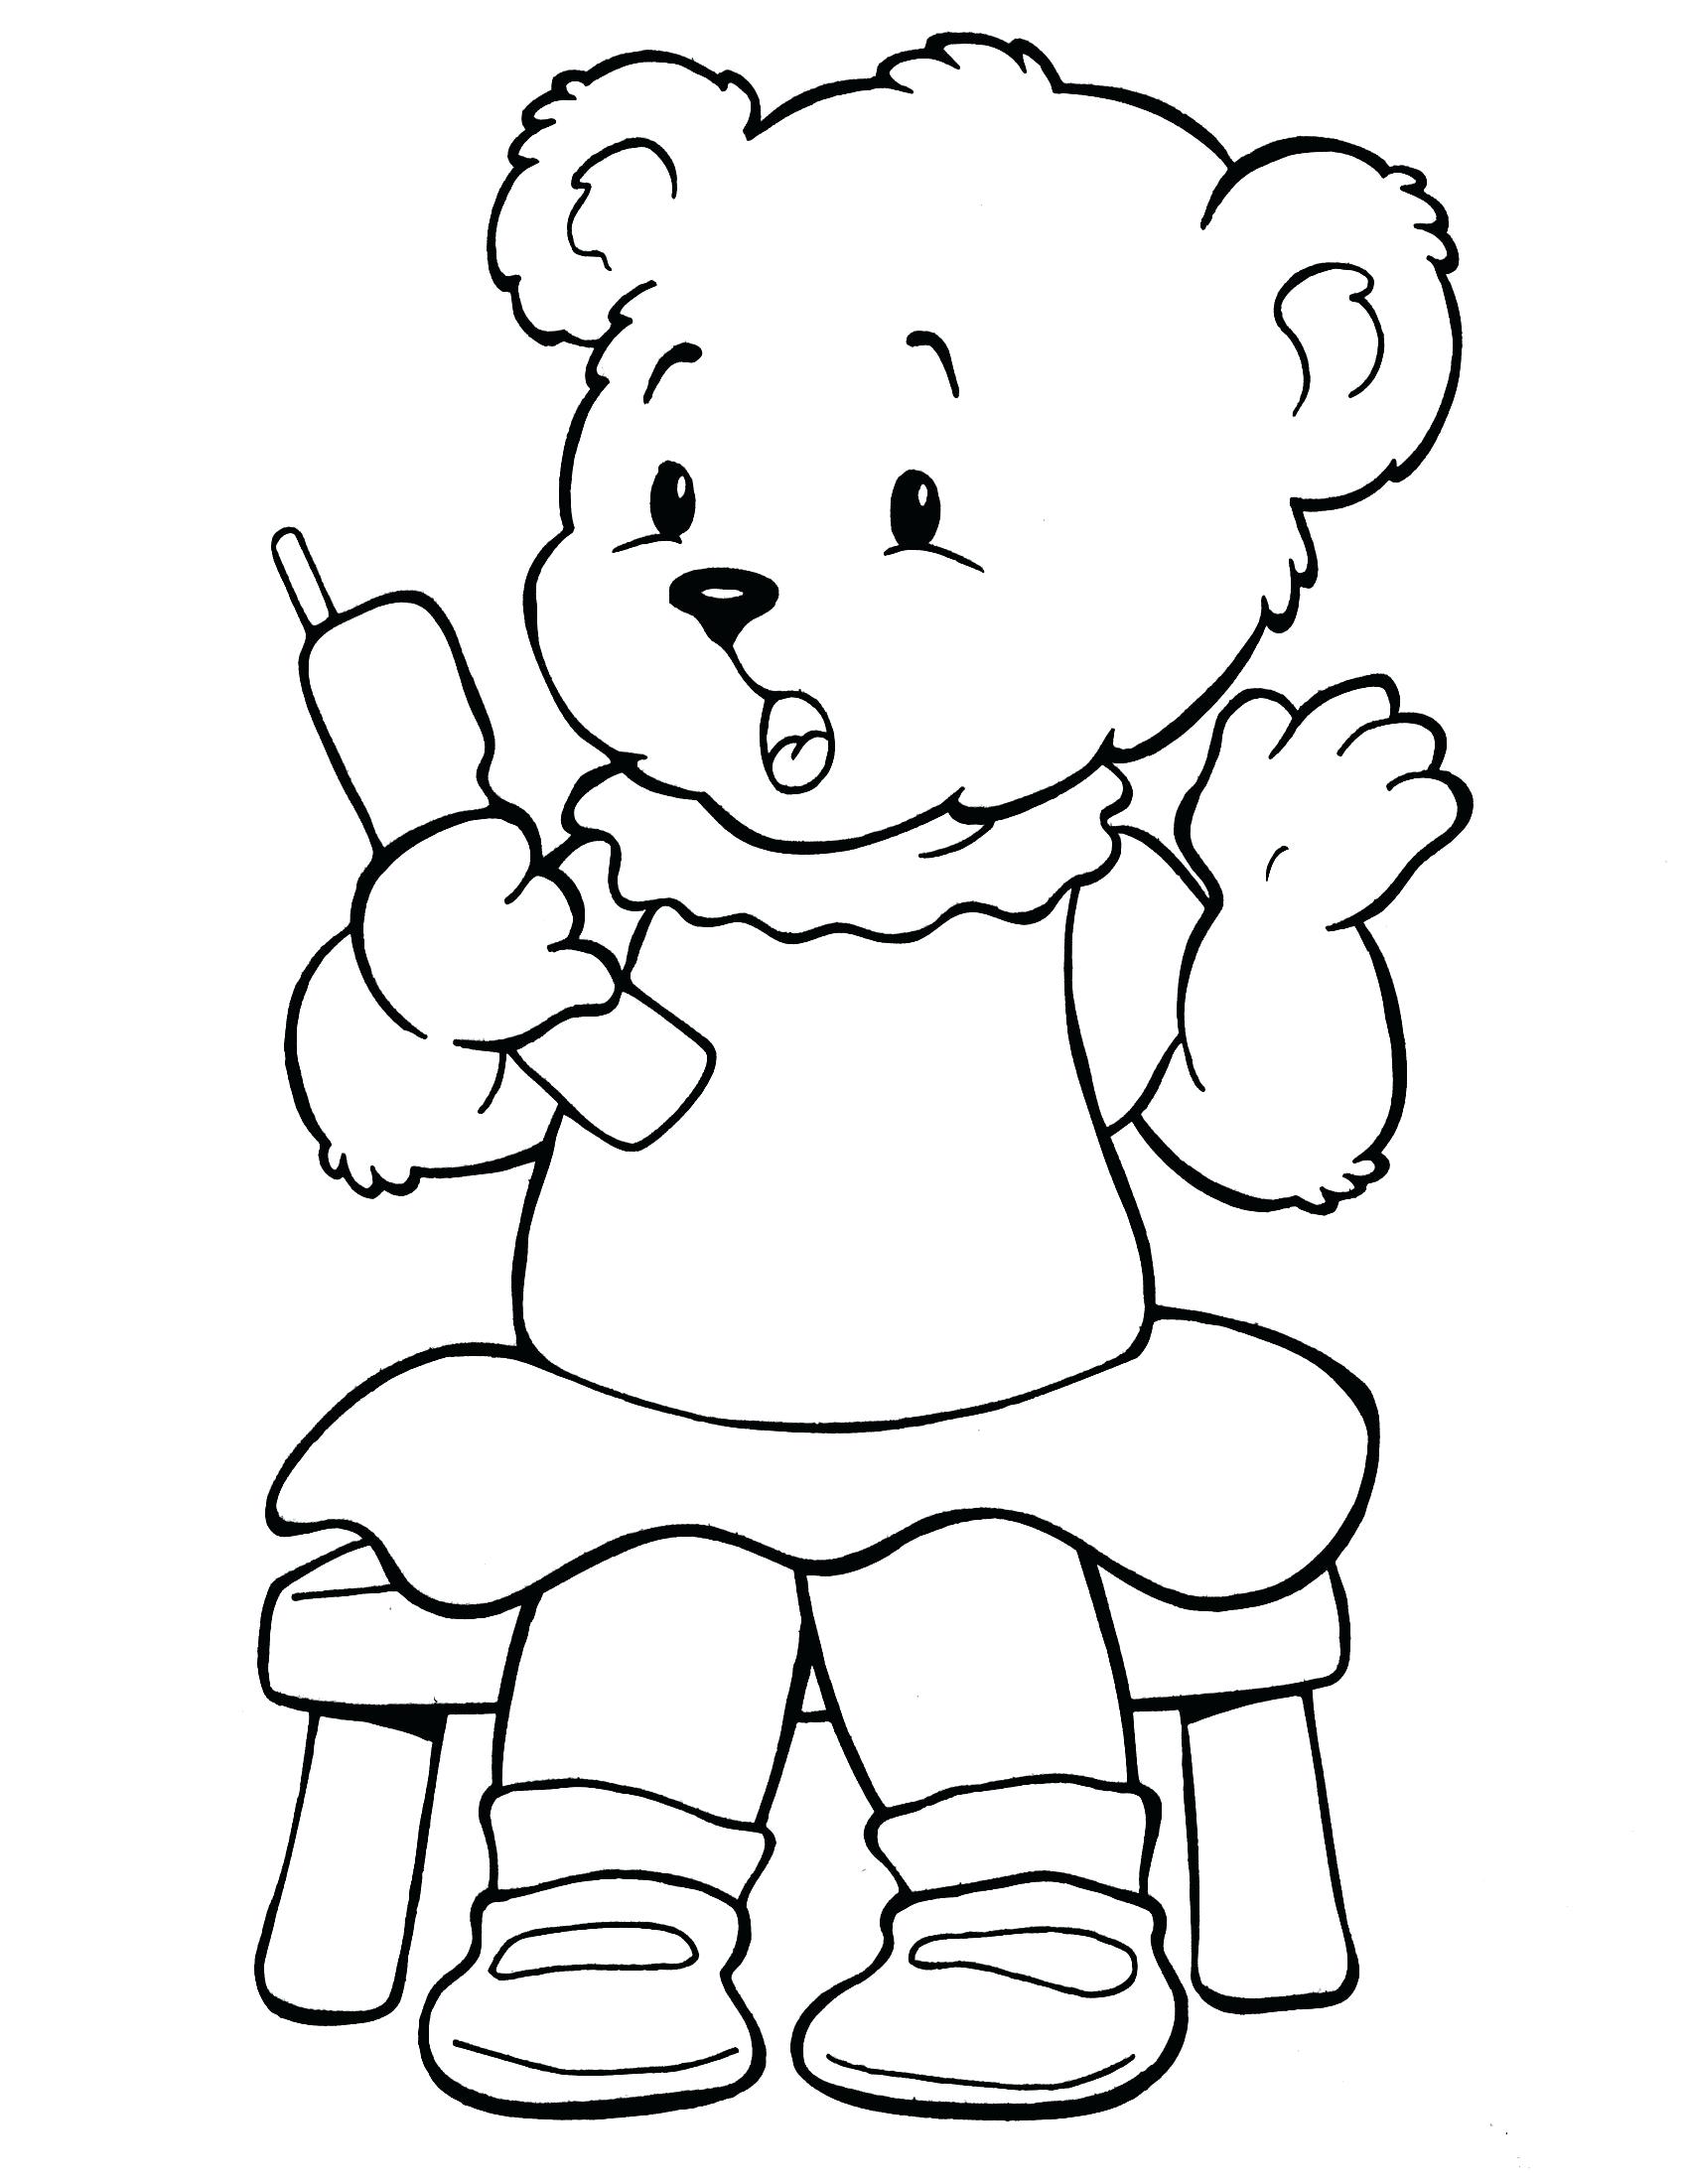 Make Your Own Coloring Pages For Free at GetColorings.com | Free